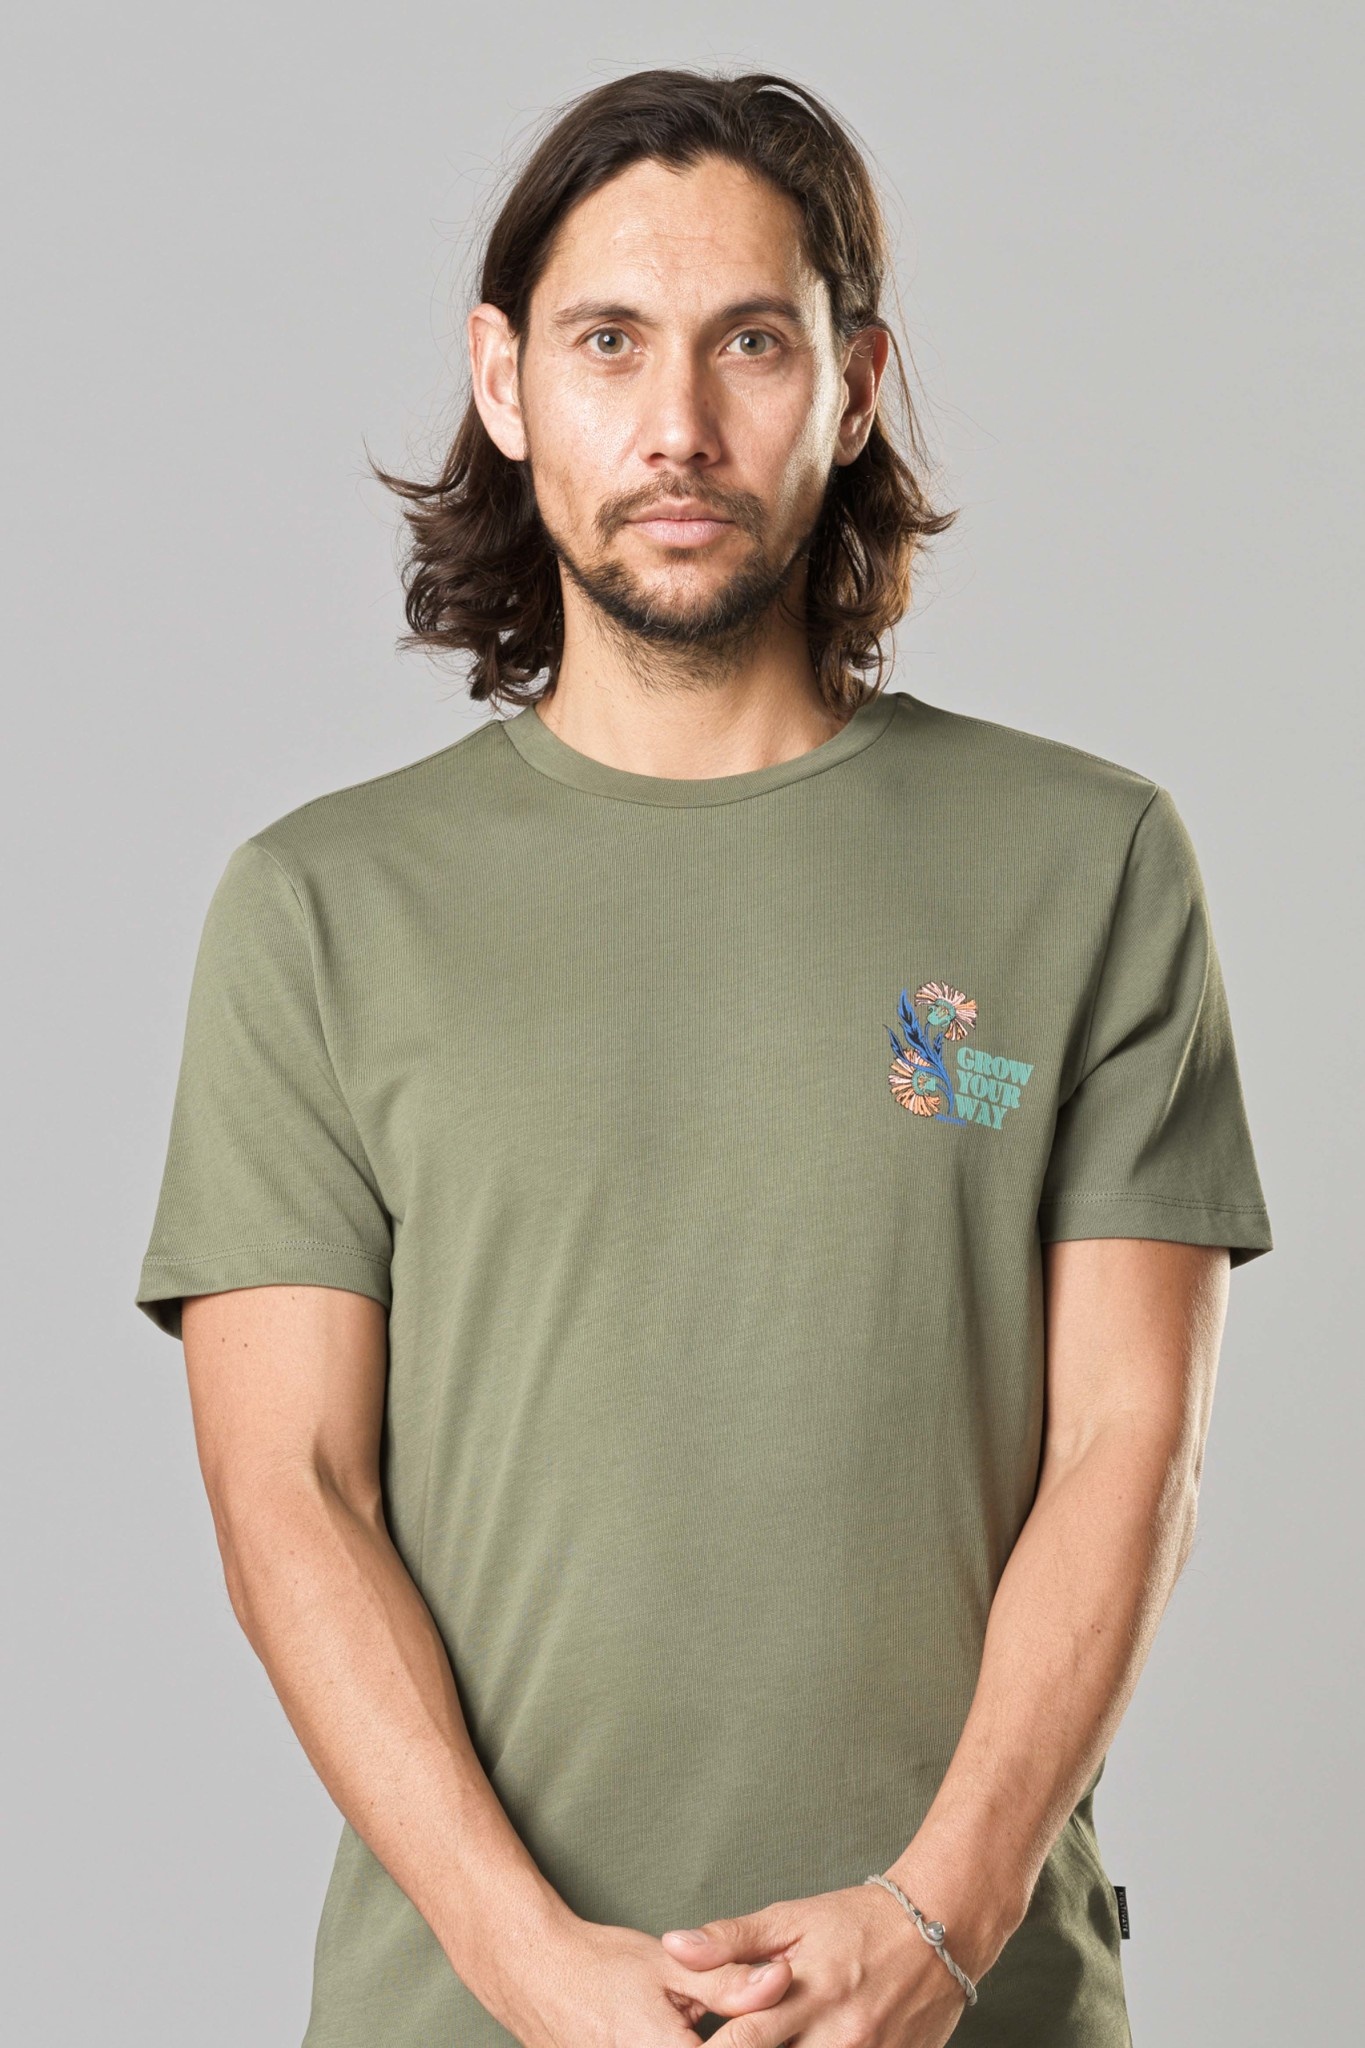 Kultivate Kultivate Way Tee Dusty Olive